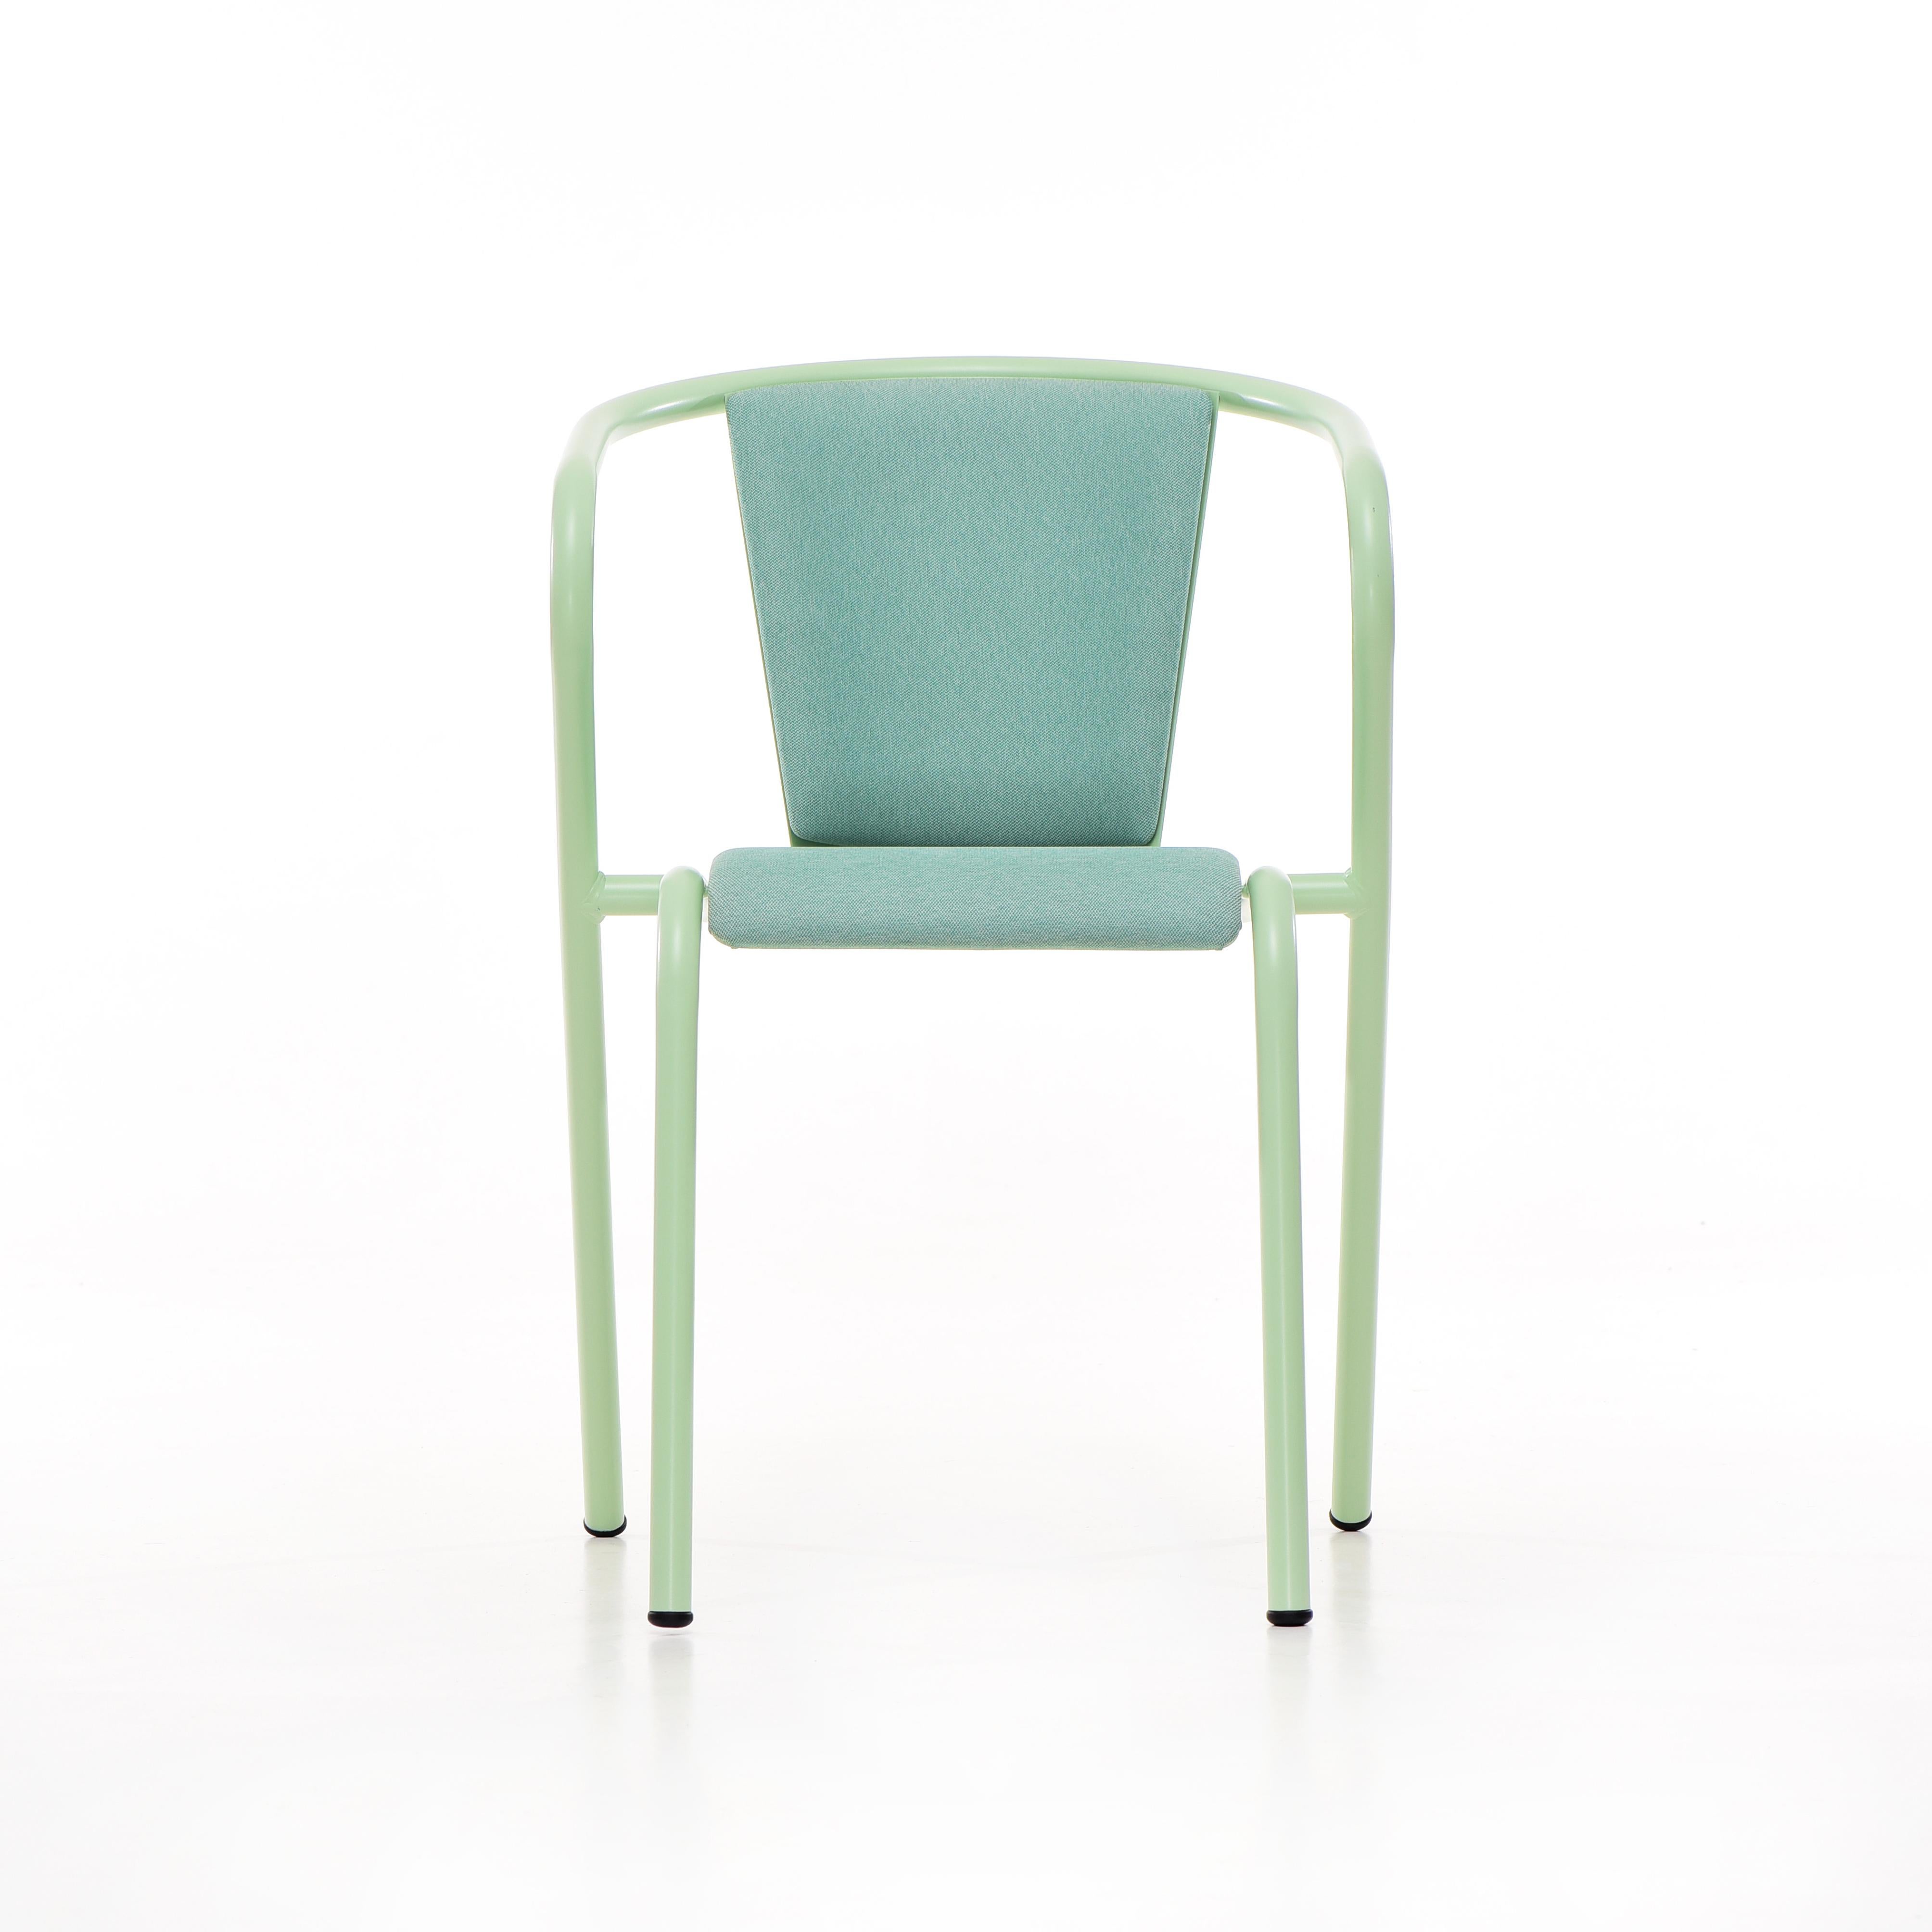 BICAchair is a sustainable stackable steel dining armchair made from recycled and recyclable steel, finished with our premium selection of powder-coating colors, in this case in a Pastel Green color, that transforms a Classic in something new and